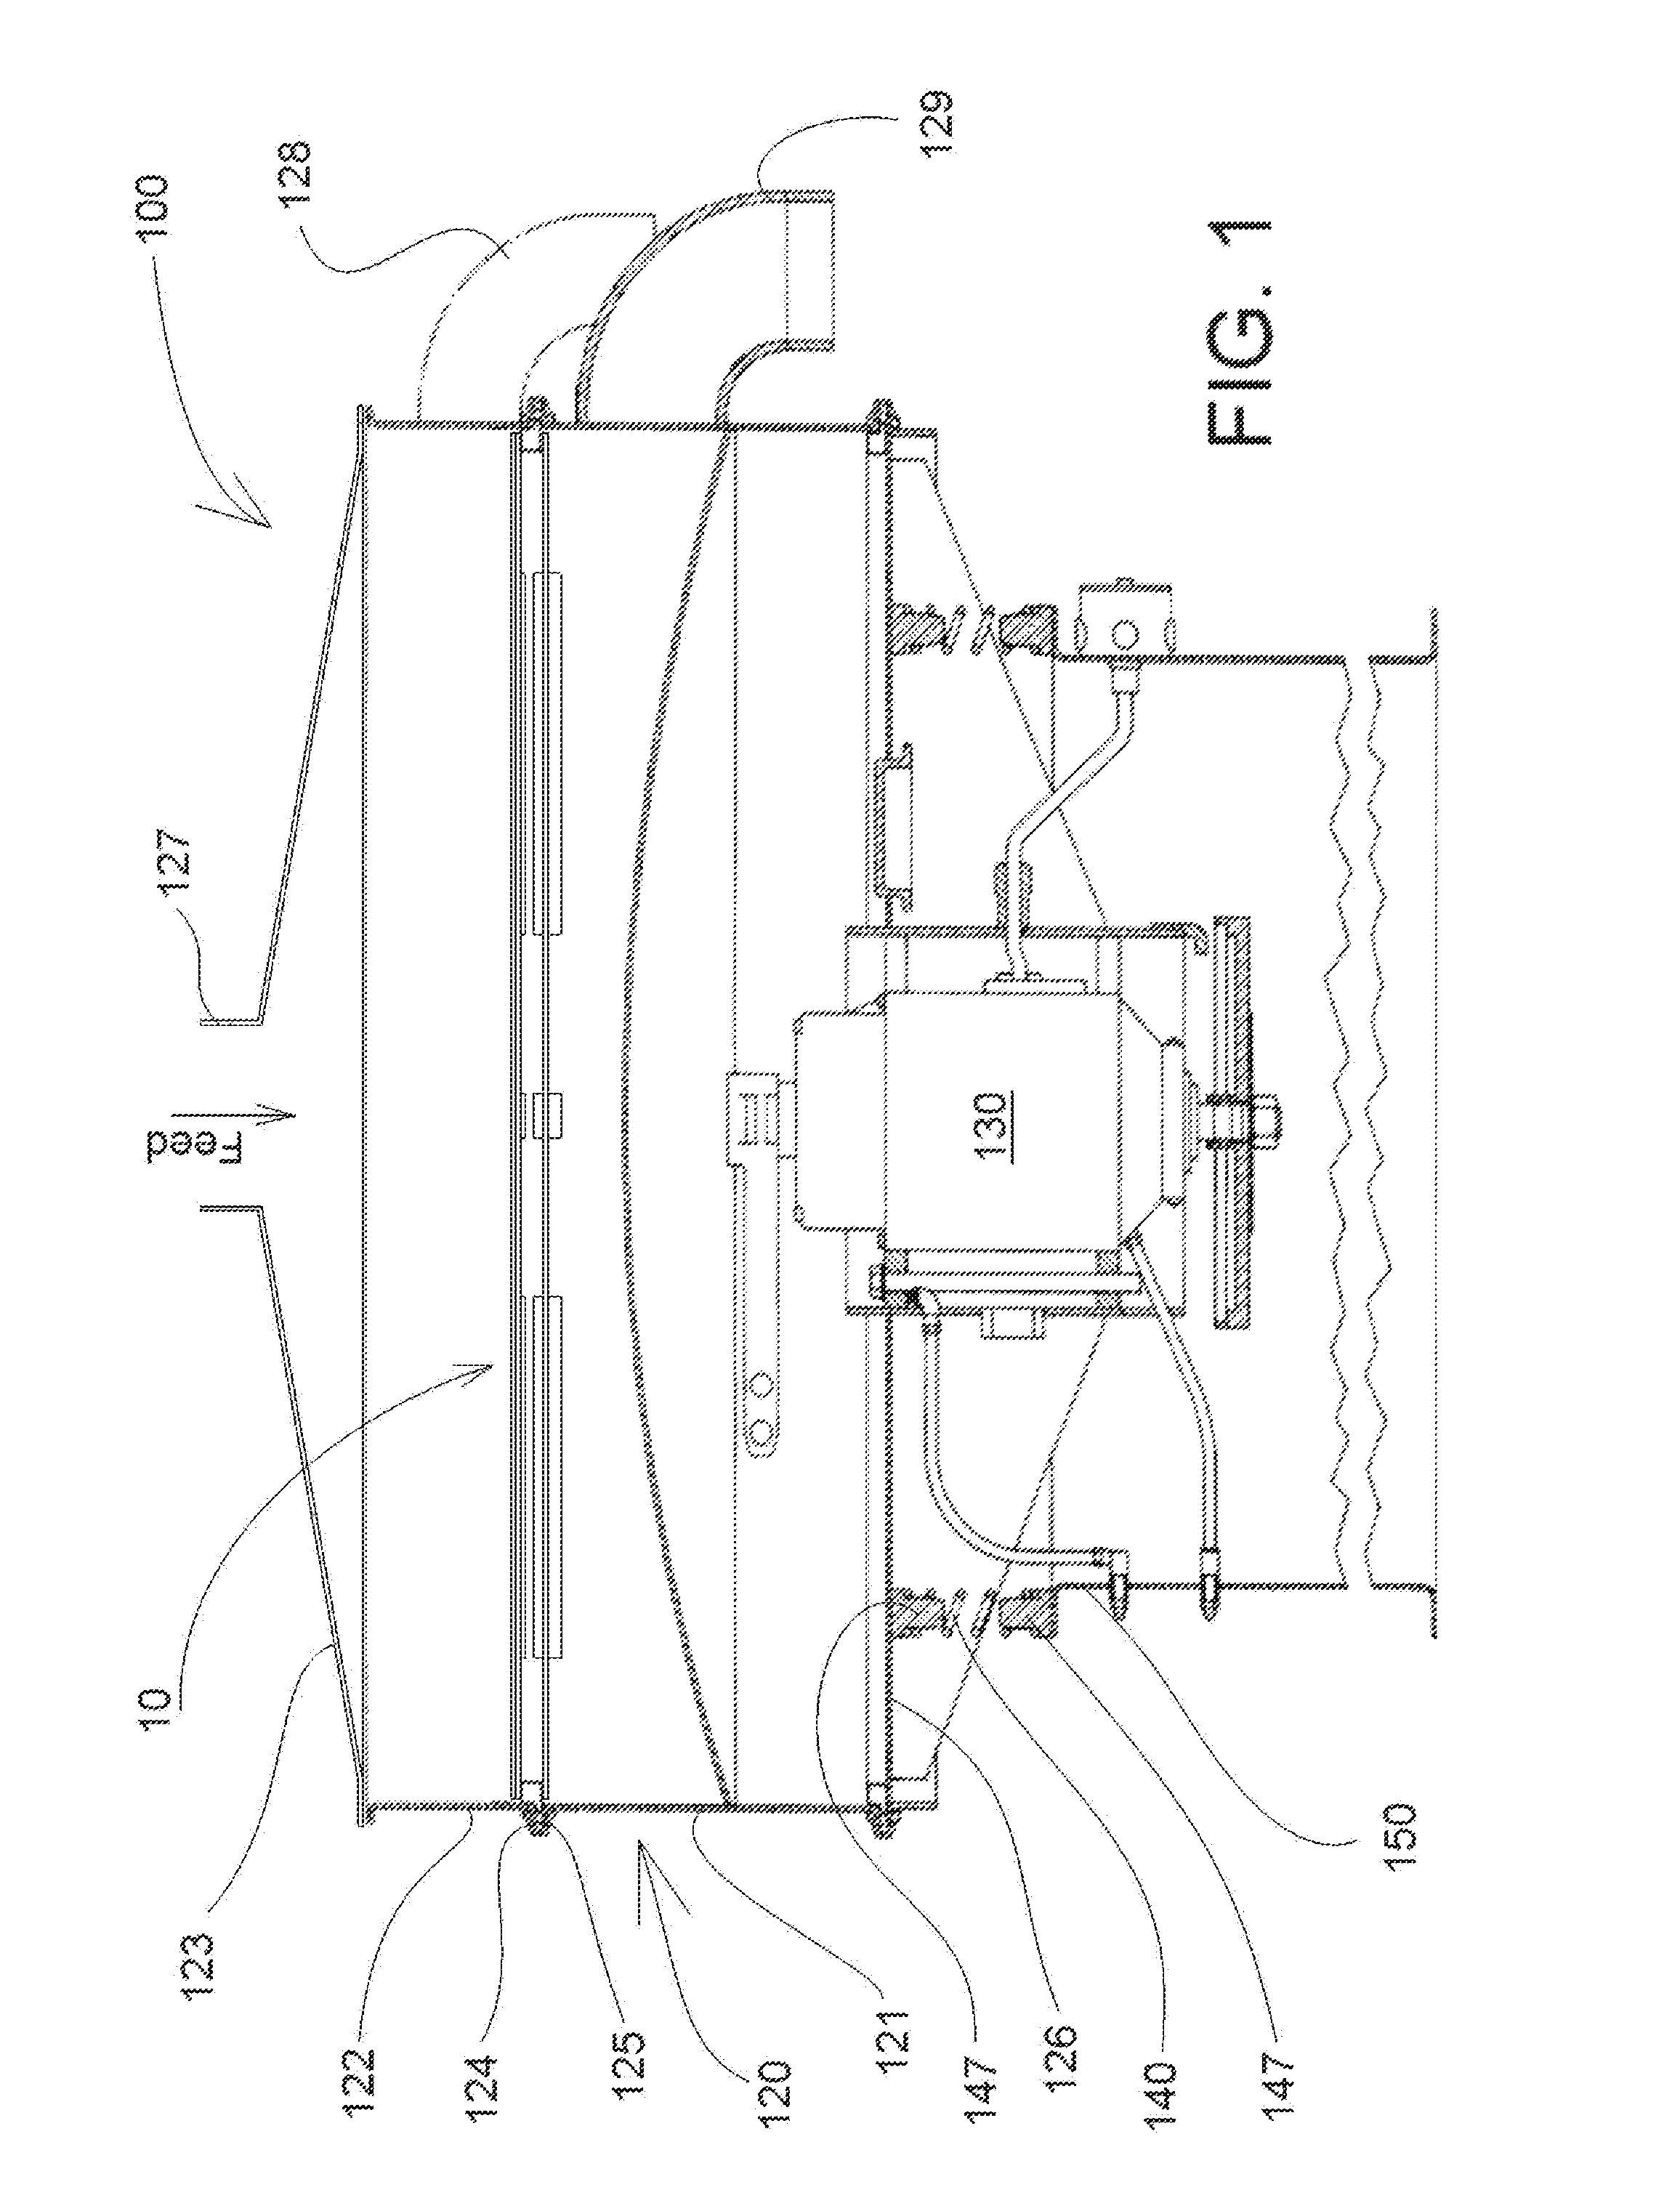 Multifrequency Sieve Assembly for Circular Vibratory Separator